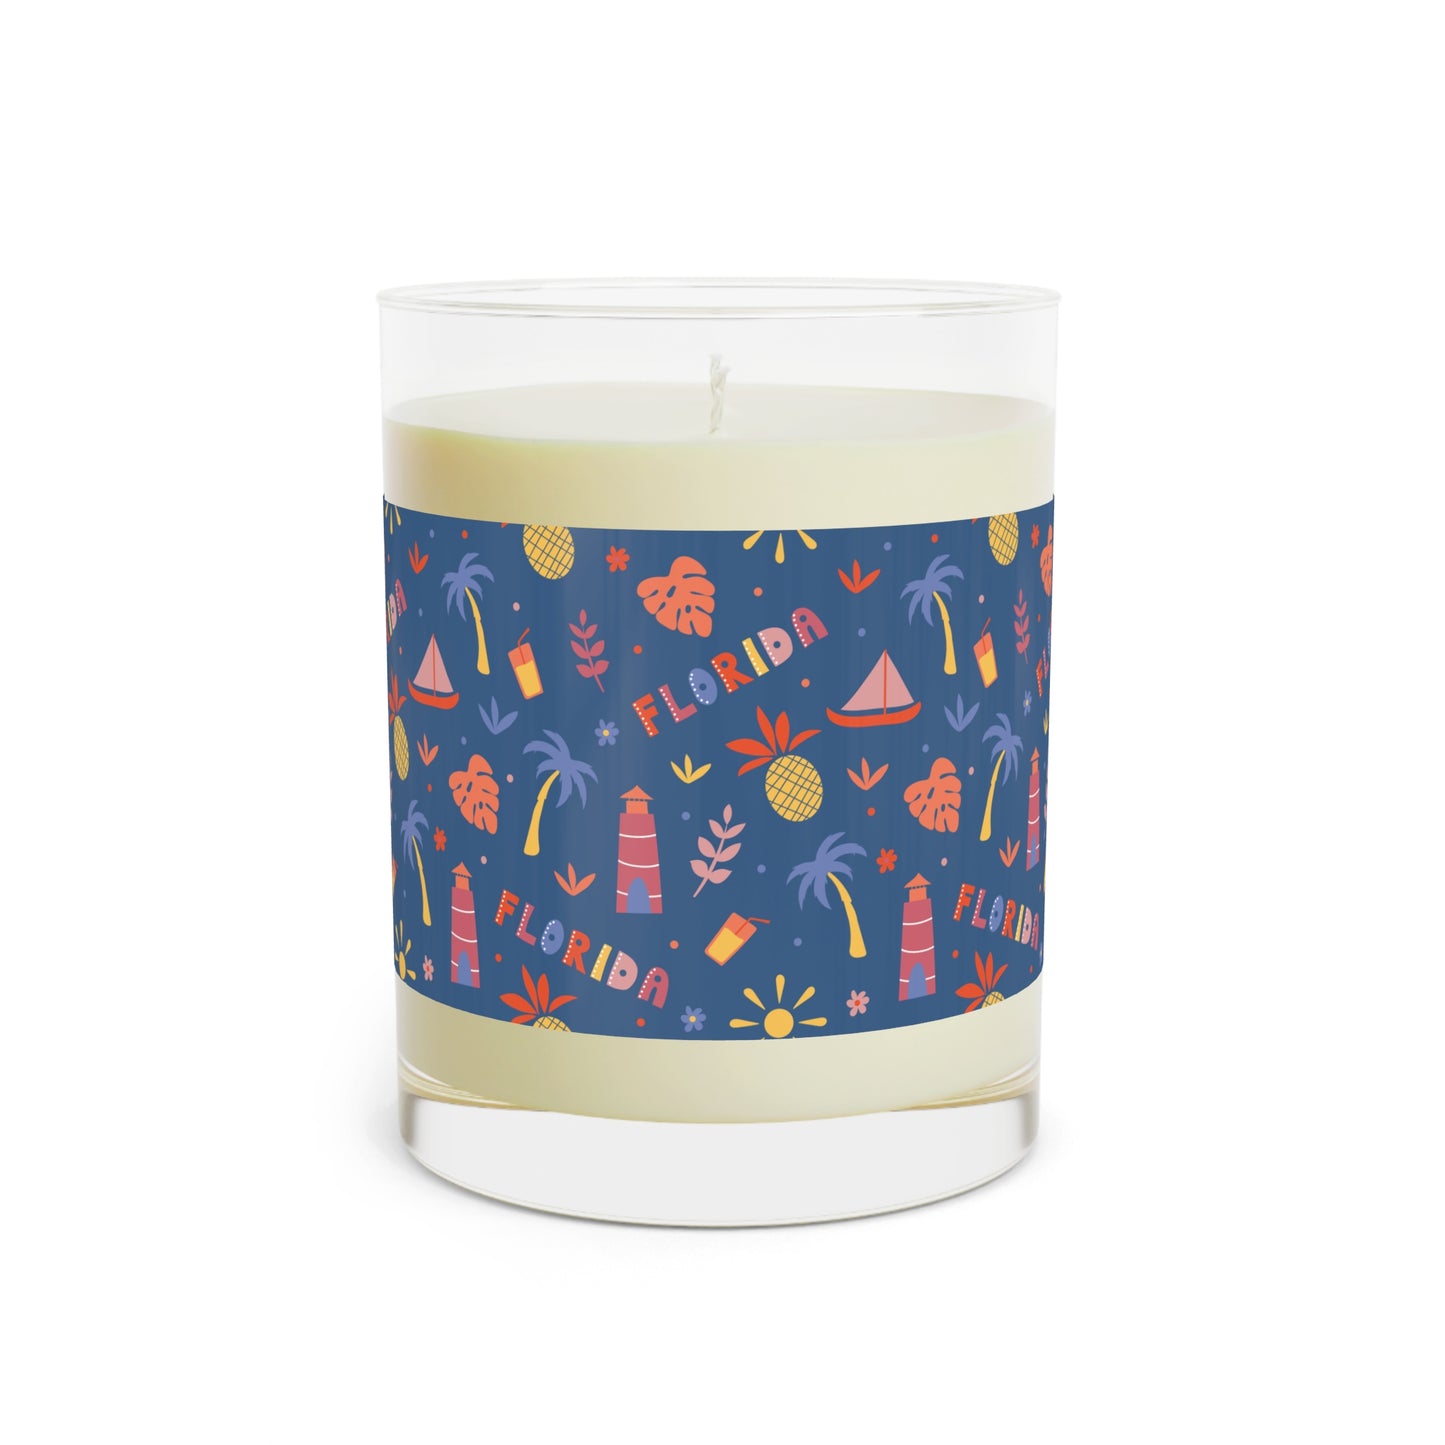 Florida Tropical Design Scented Soy Aromatherapy Candle